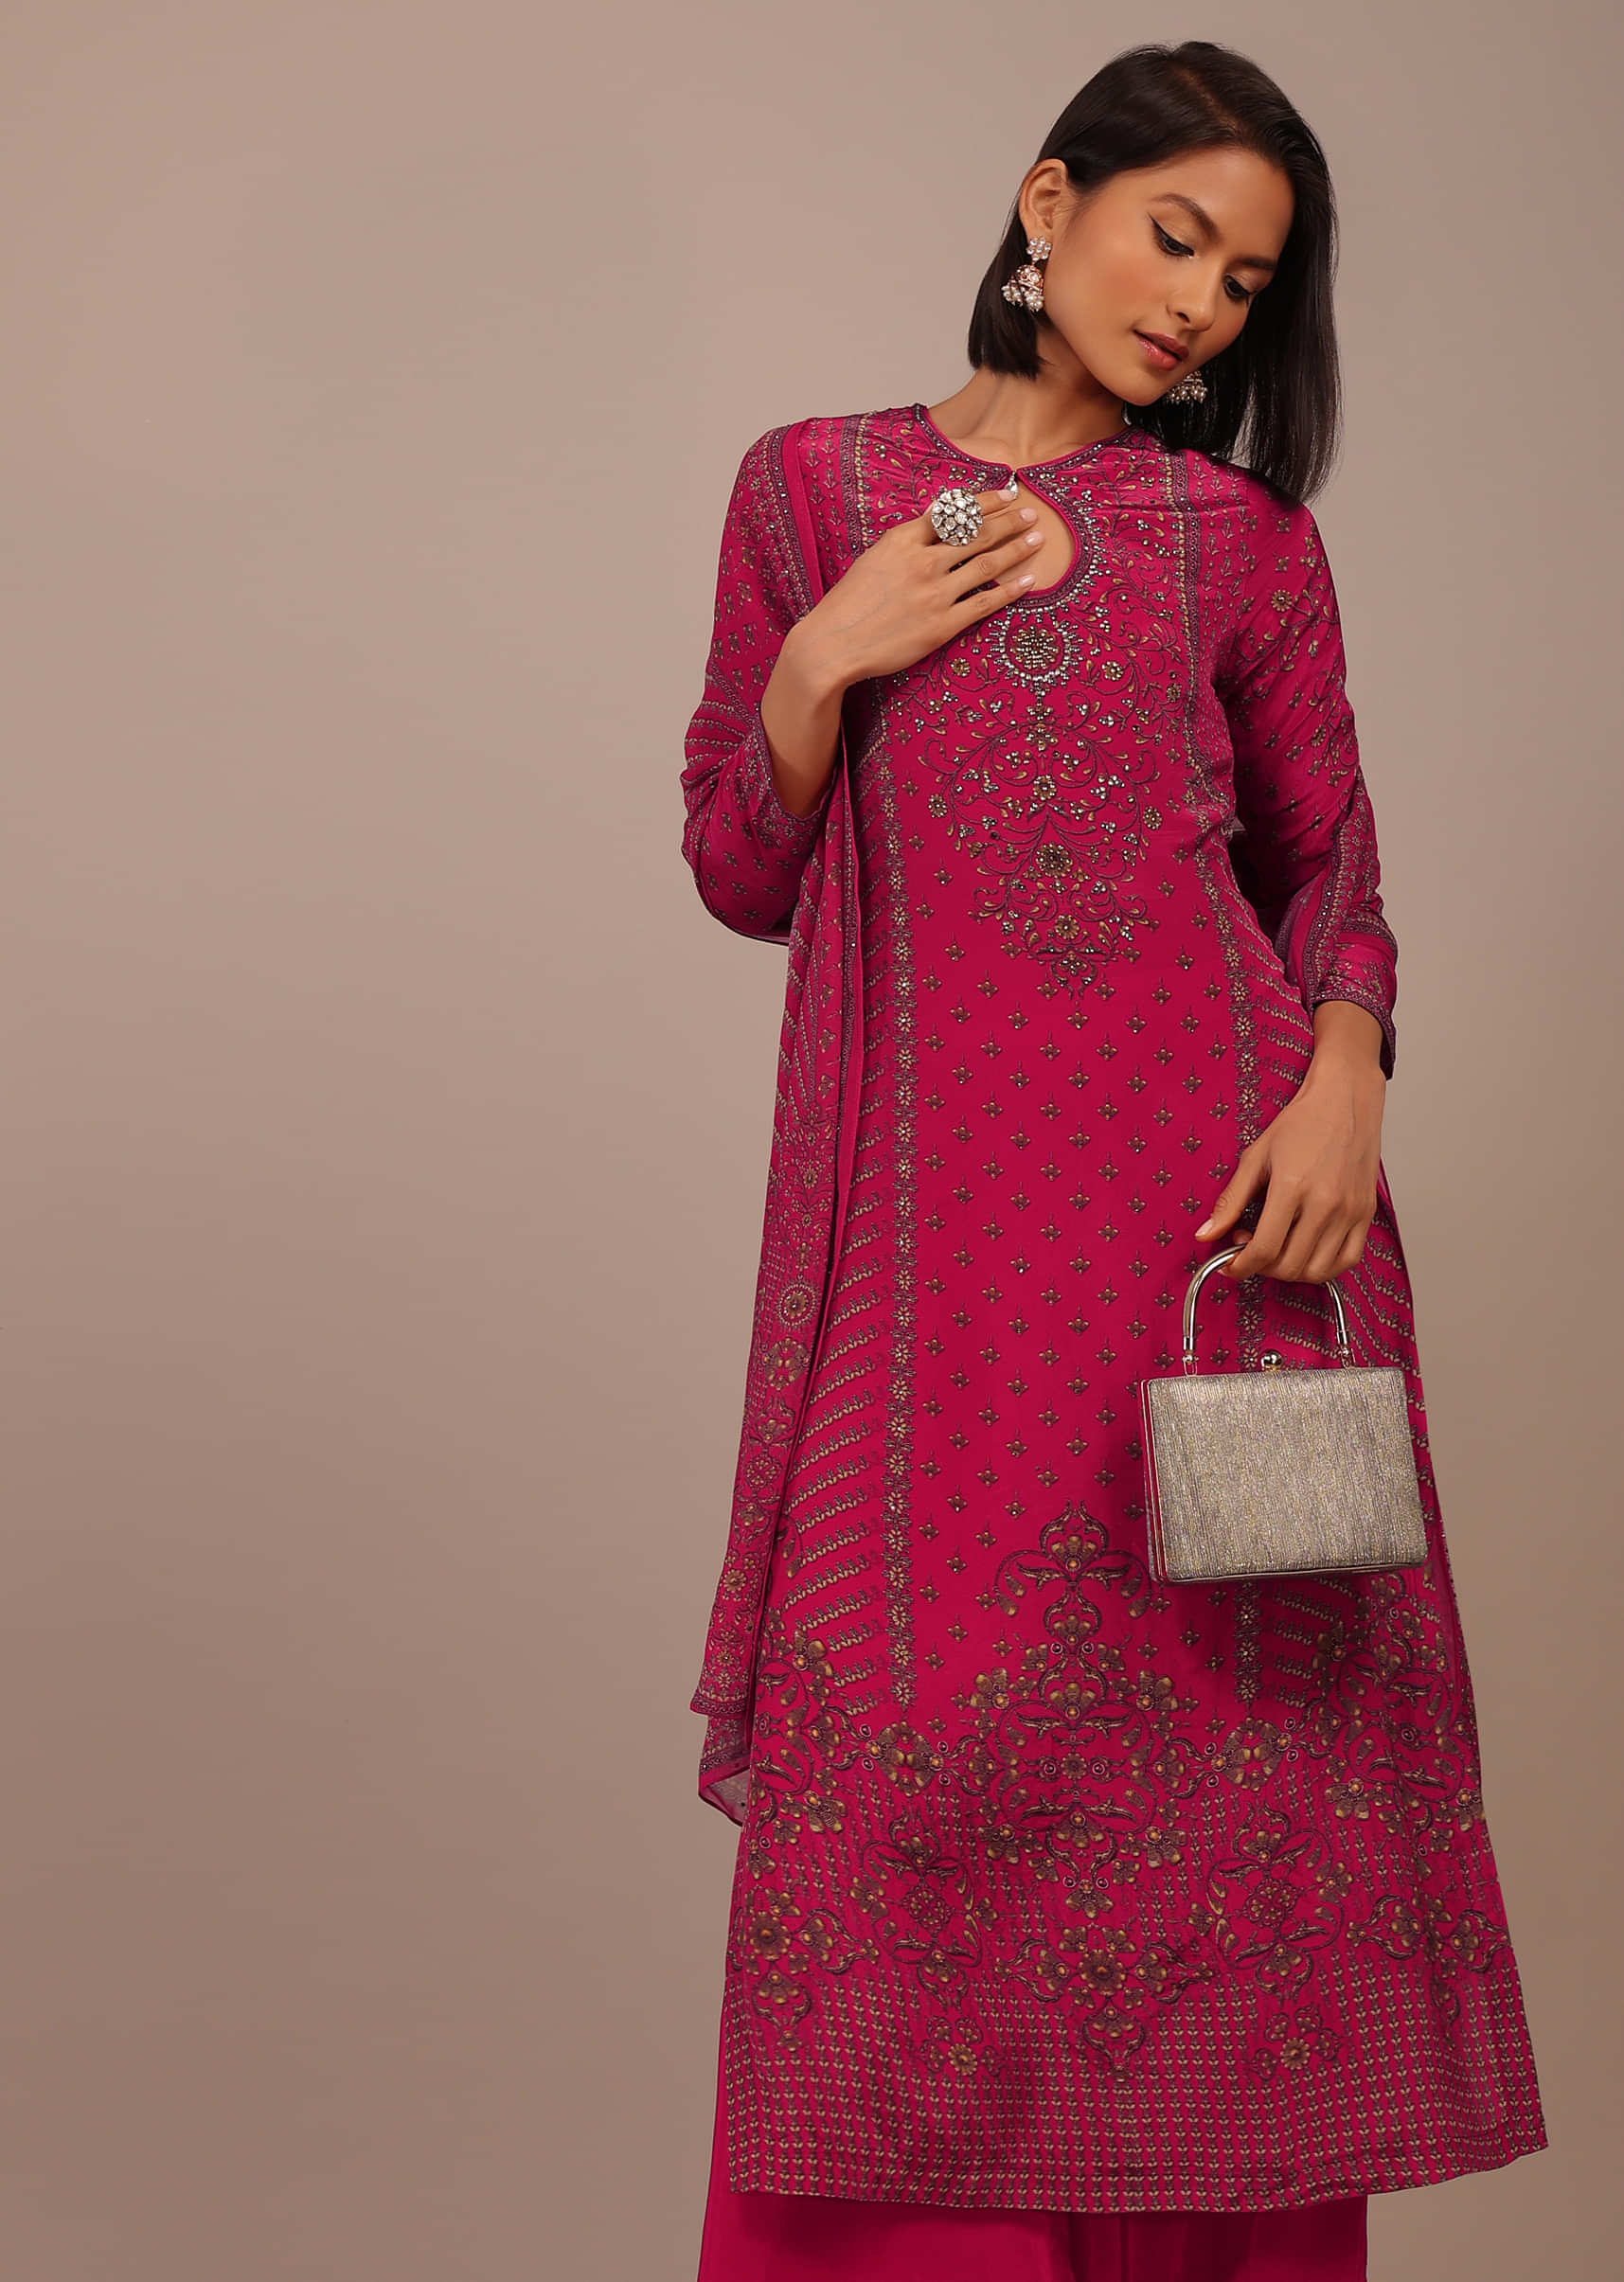 Hot Pink Printed Palazzo Suit With Stonework In Crepe